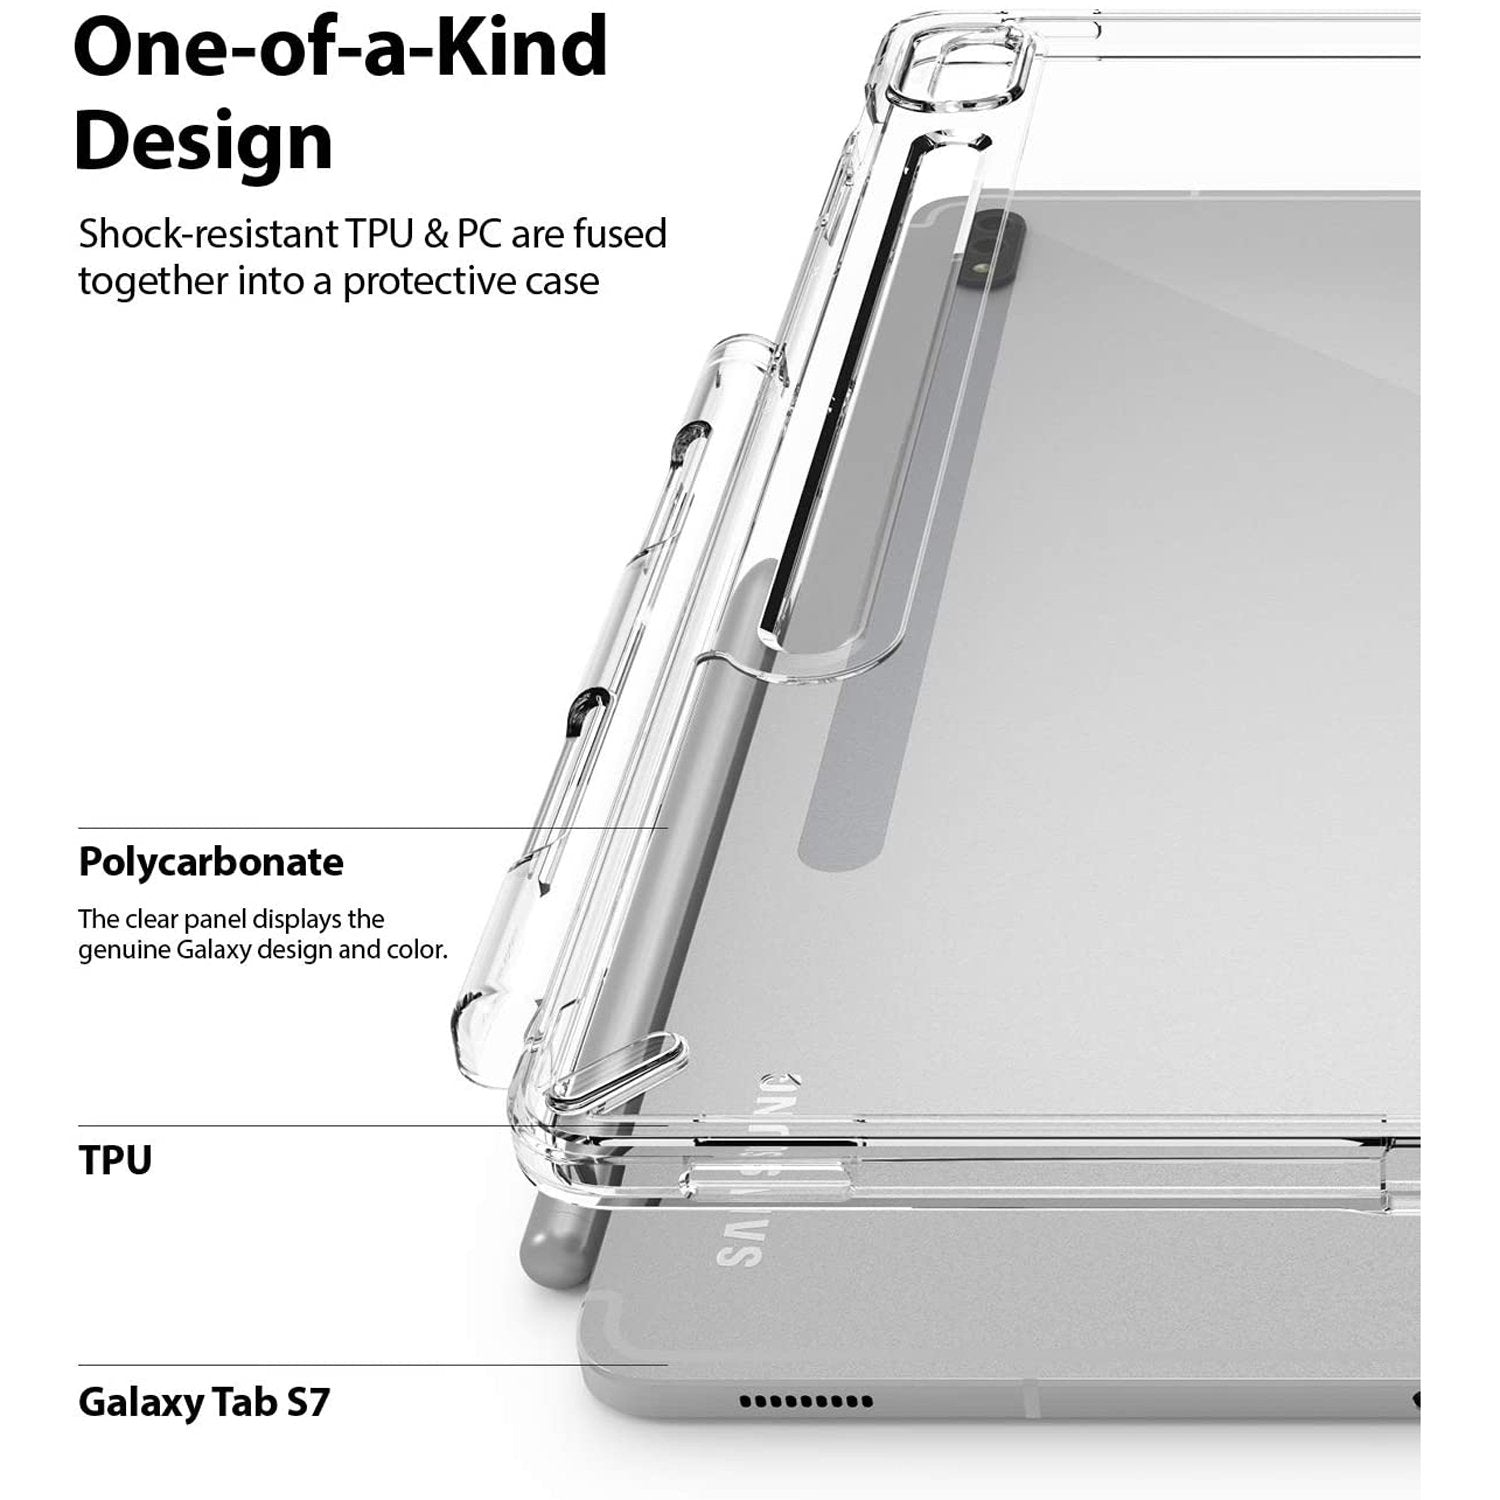 Ringke Fusion Case for Samsung Galaxy Tab S7, Clear Default Ringke 